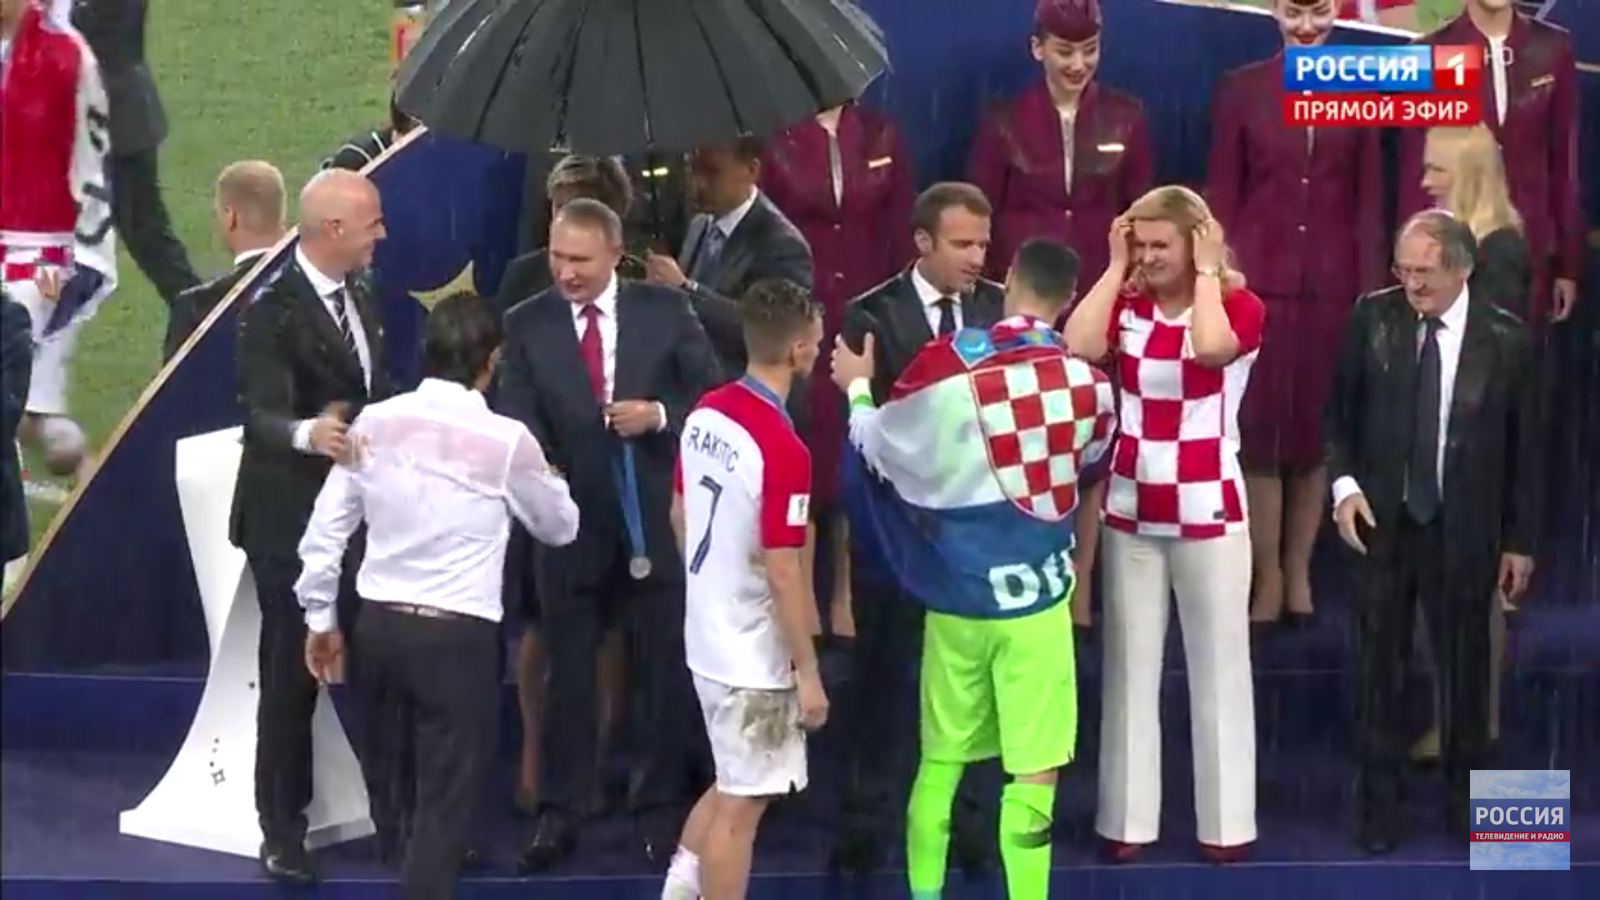 The main thing is that Vova does not catch a cold - 2018 FIFA World Cup, Hospitality